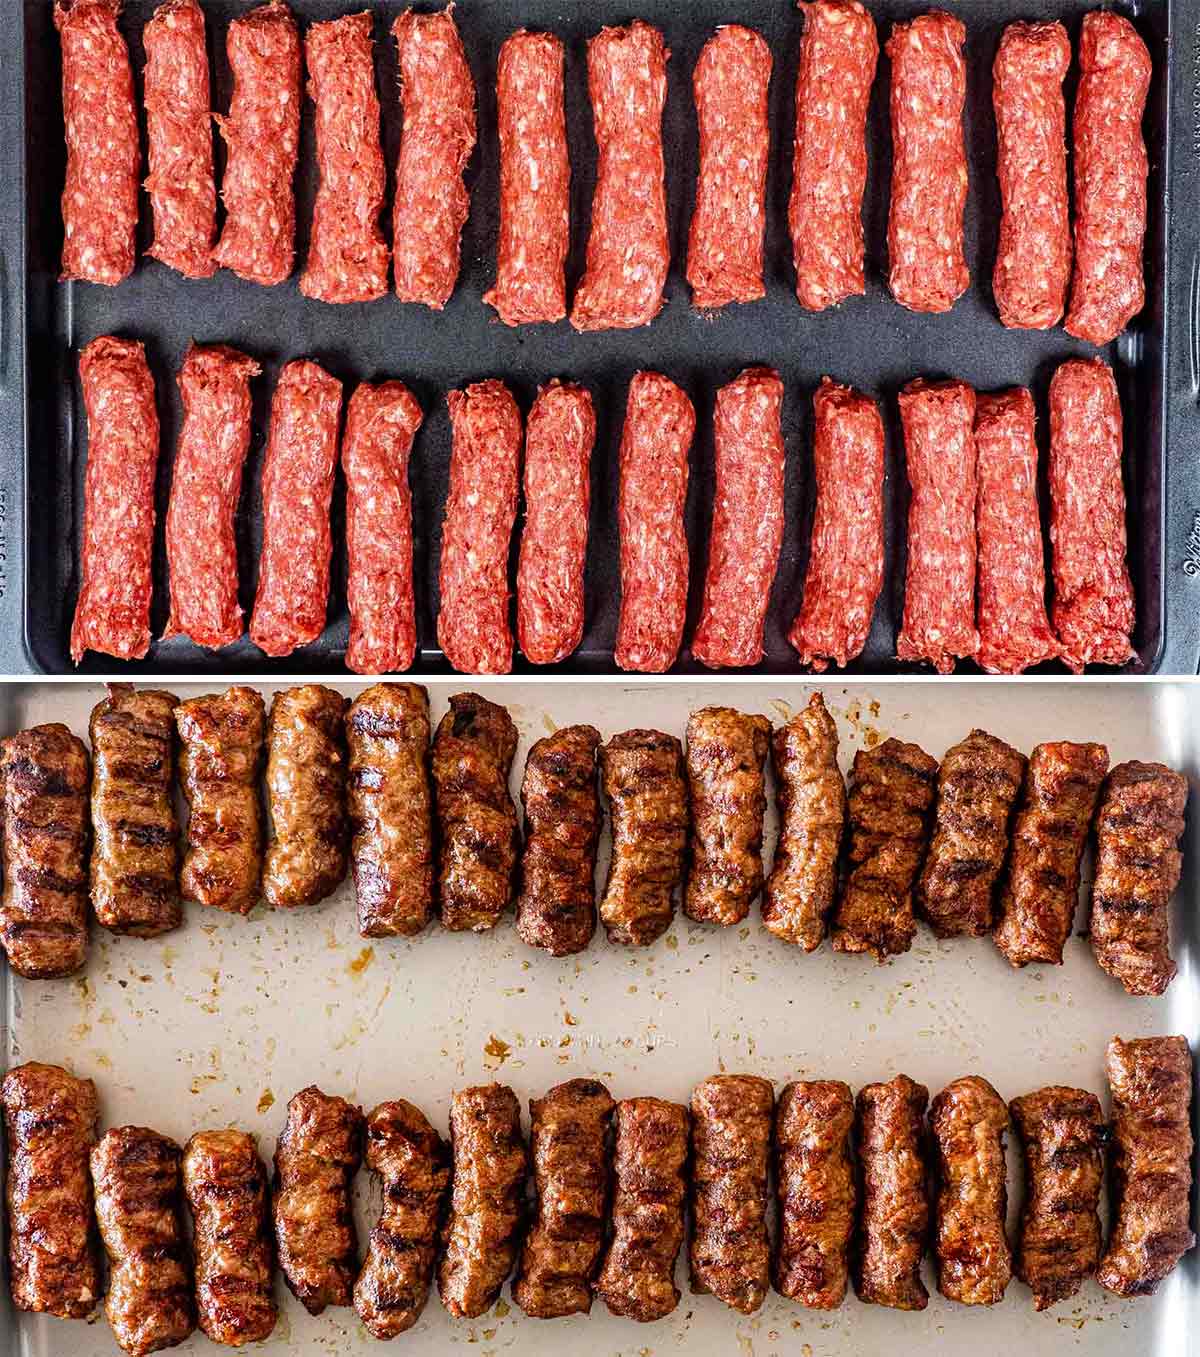 two side by side pictures showing mititei before grilling and after.